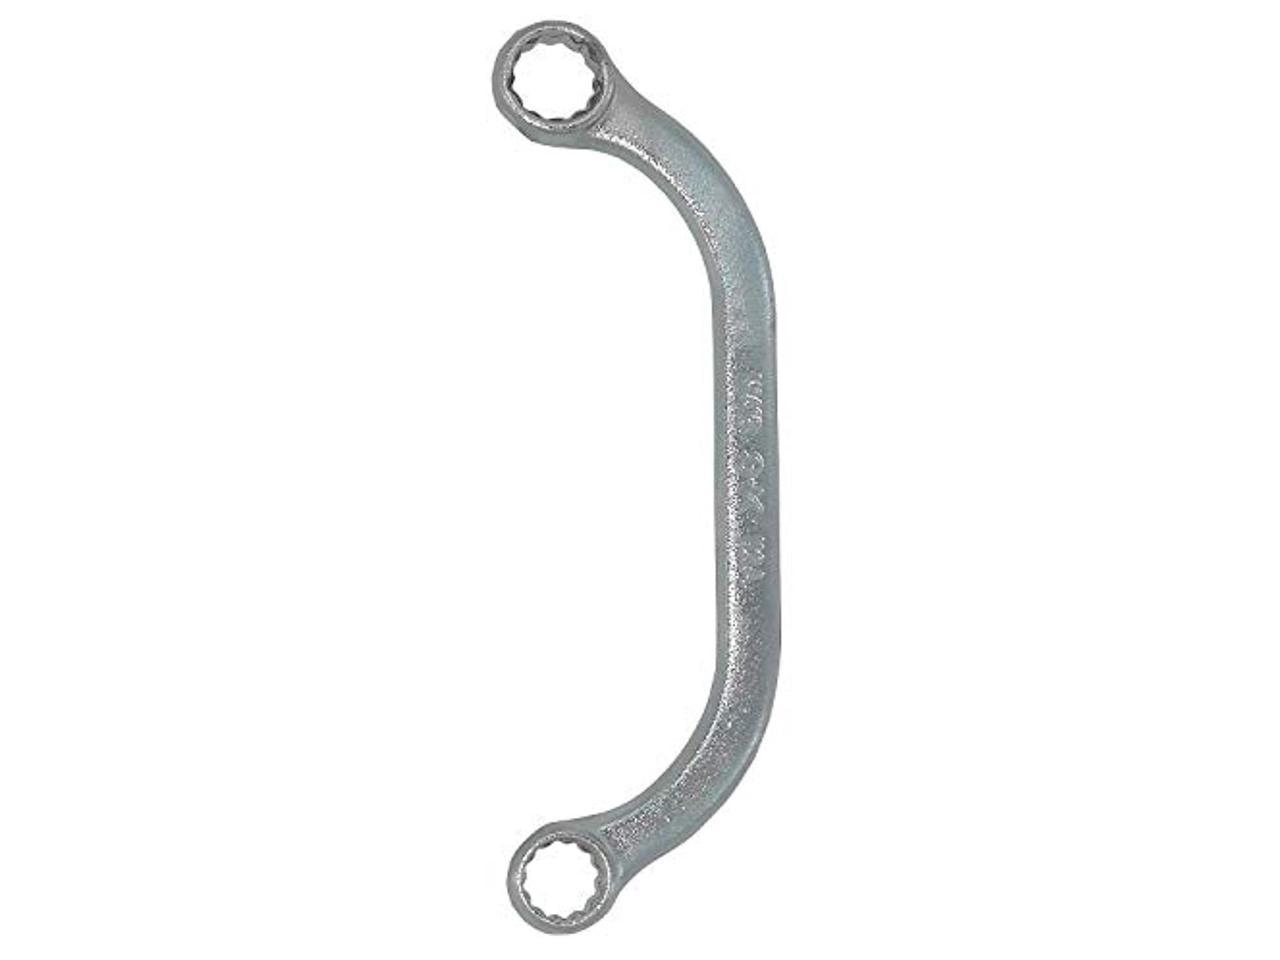 Allen Wrench Open End 1-1/16 X 1-1/8 Chrome 21019 